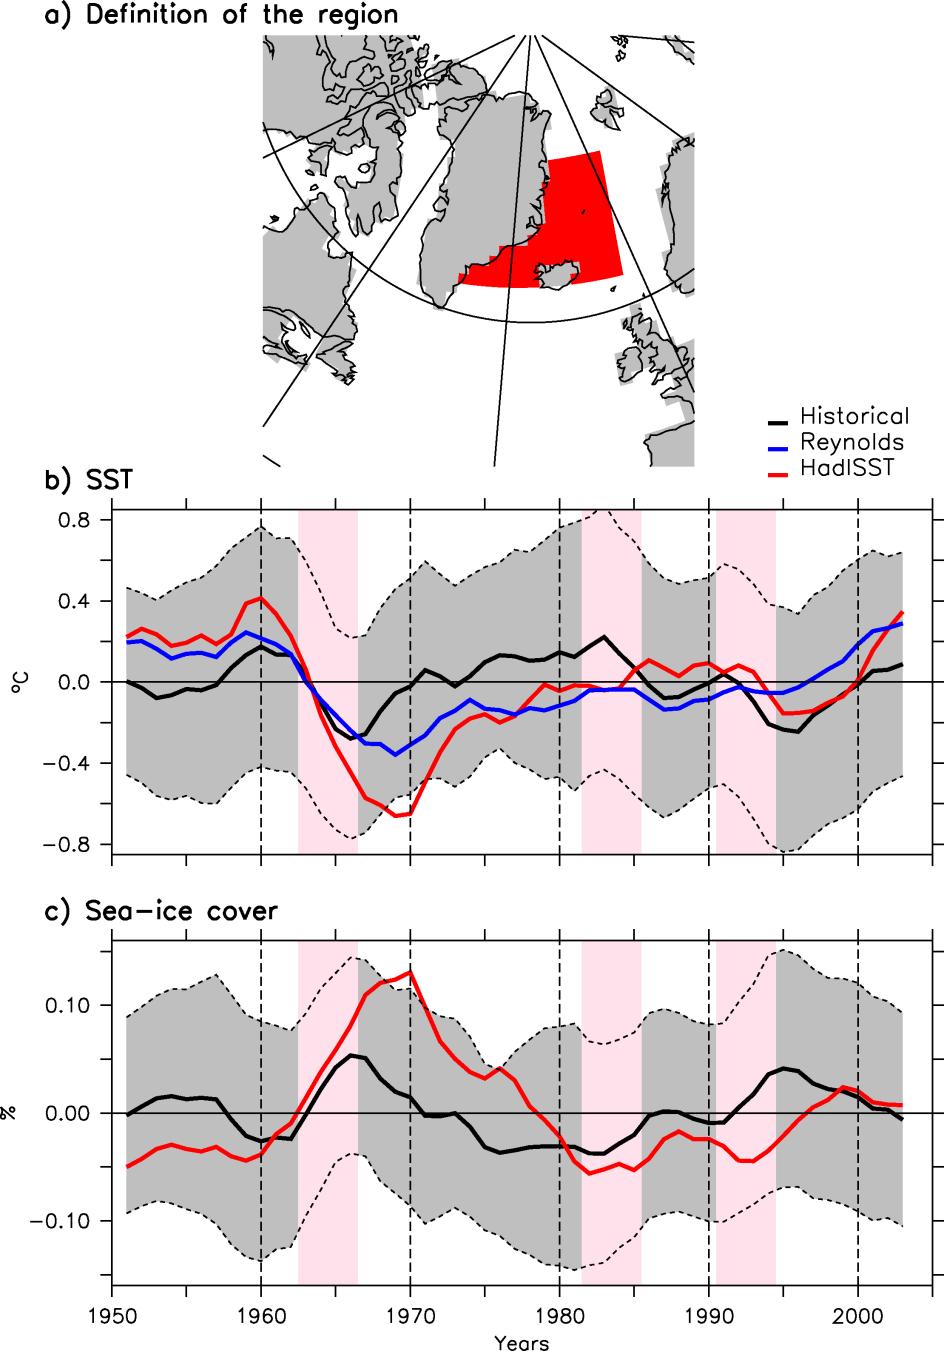 Supplementary Figure 3: Time evolution over the red region shown in panel a) of b) the SST and c) of the ice cover in the